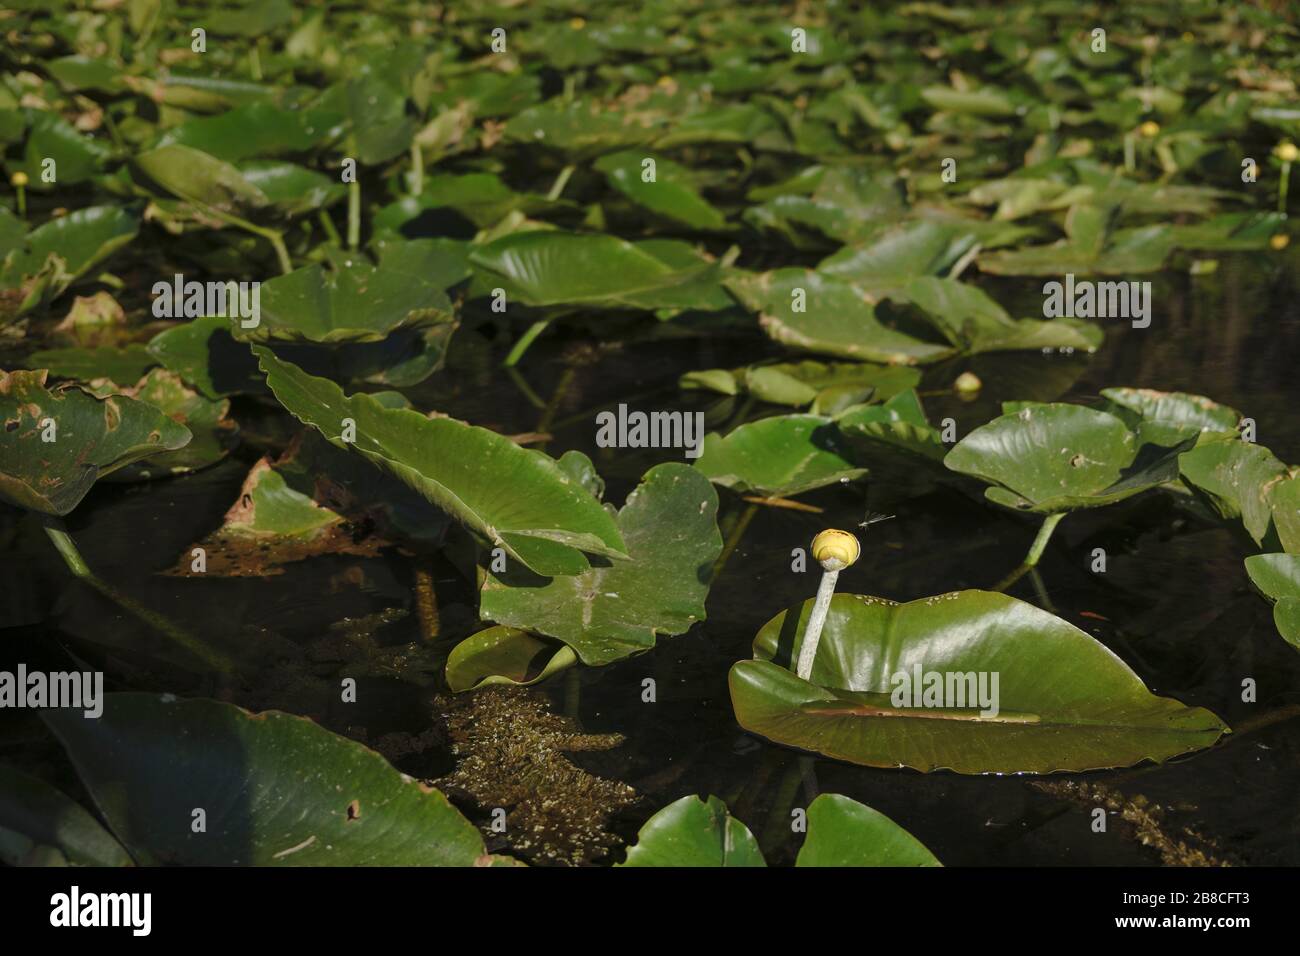 Spatterdock, Cow lily. Rainbow River. Dunnellon Florida. Yellow flower head and leaves. Stock Photo